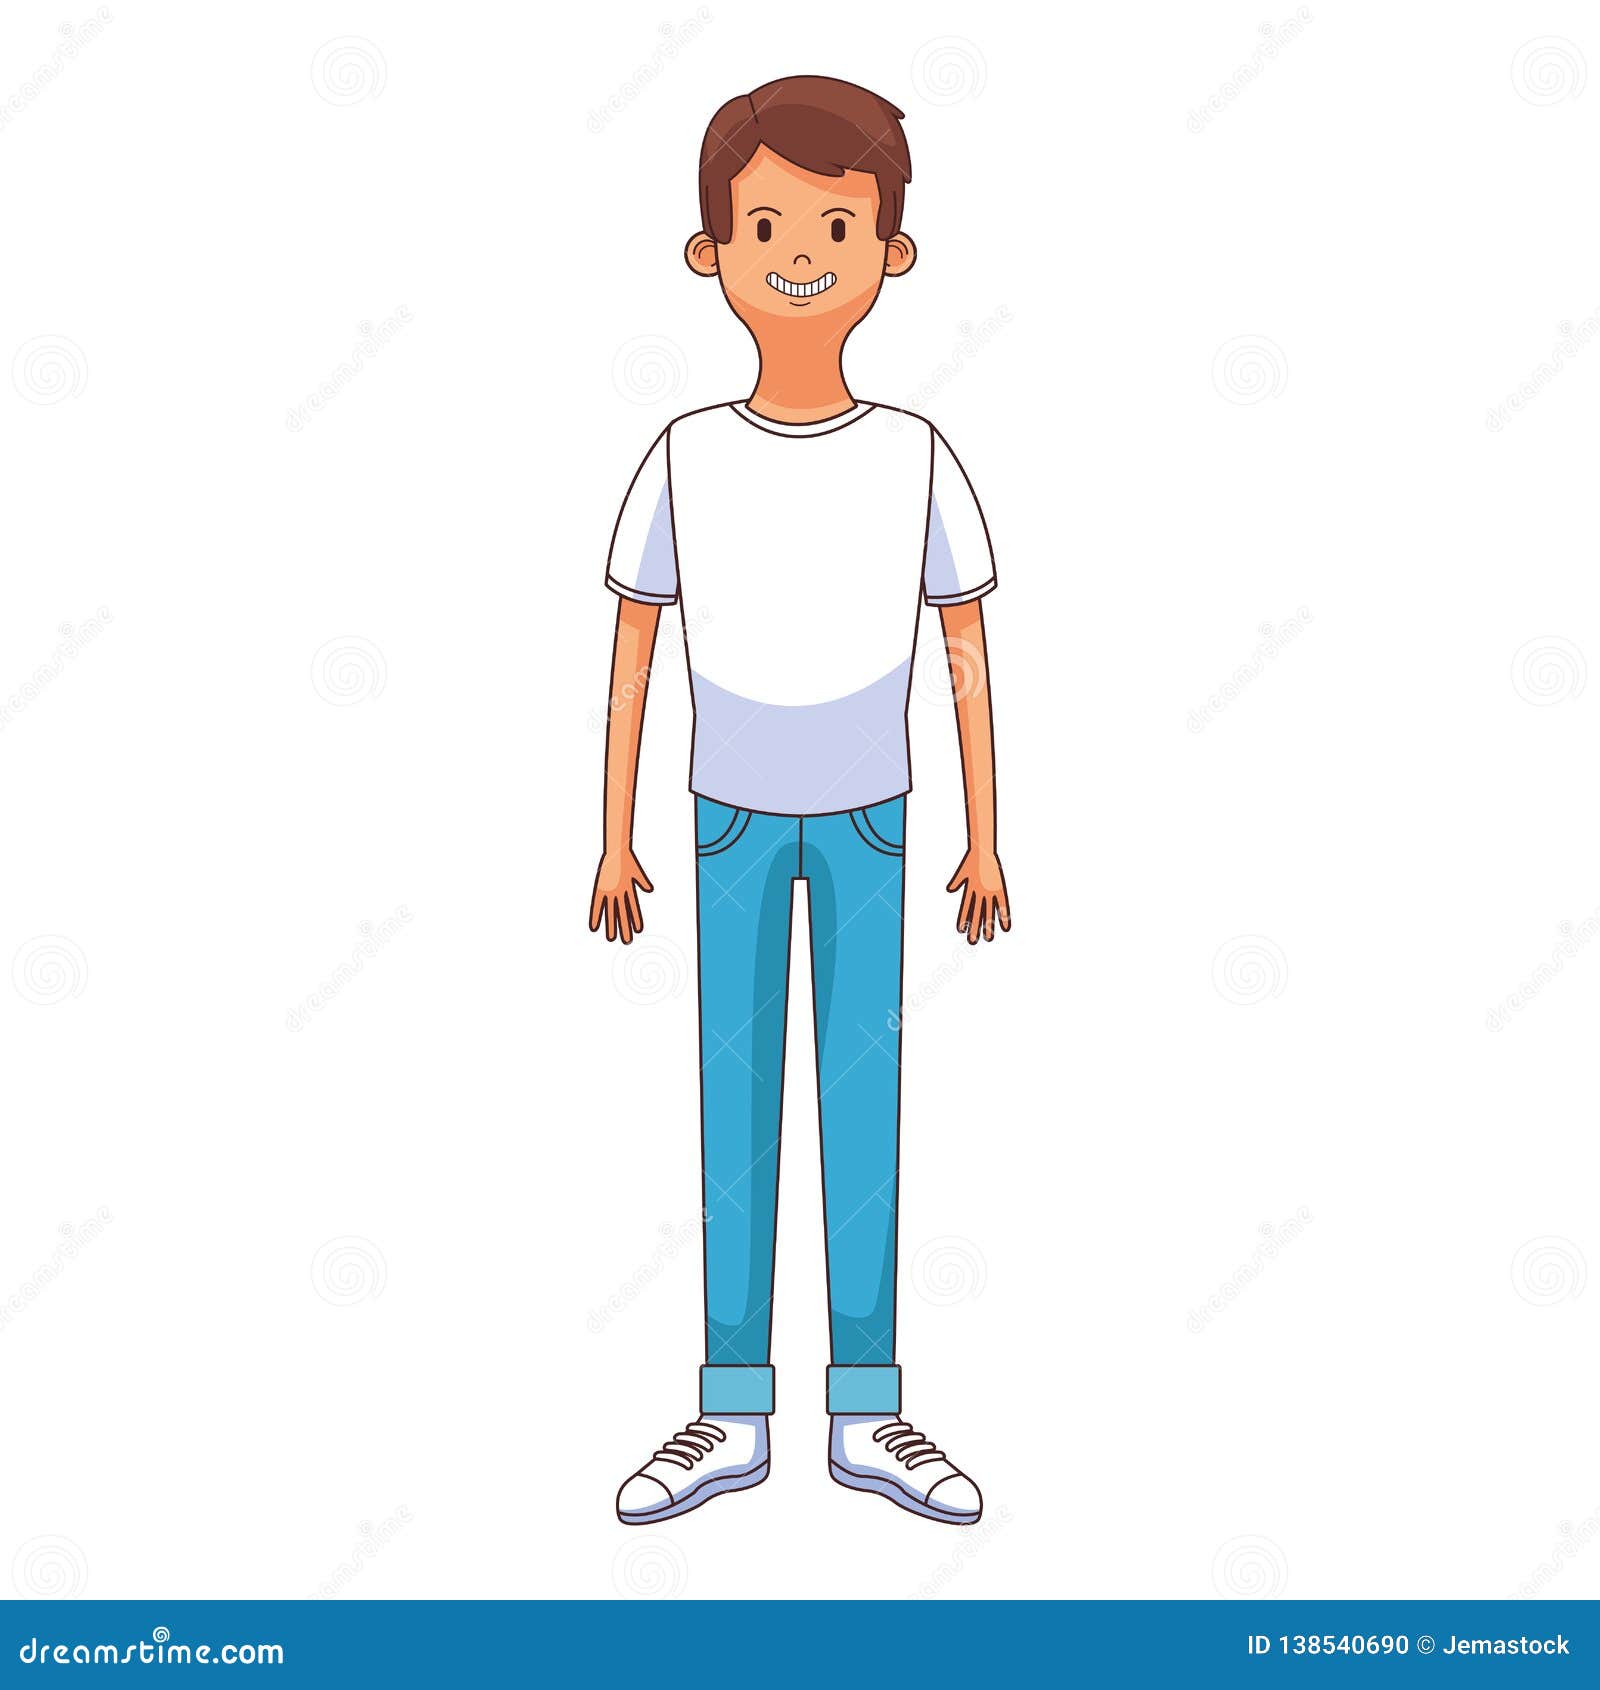 Man young avatar stock vector. Illustration of design - 138540690